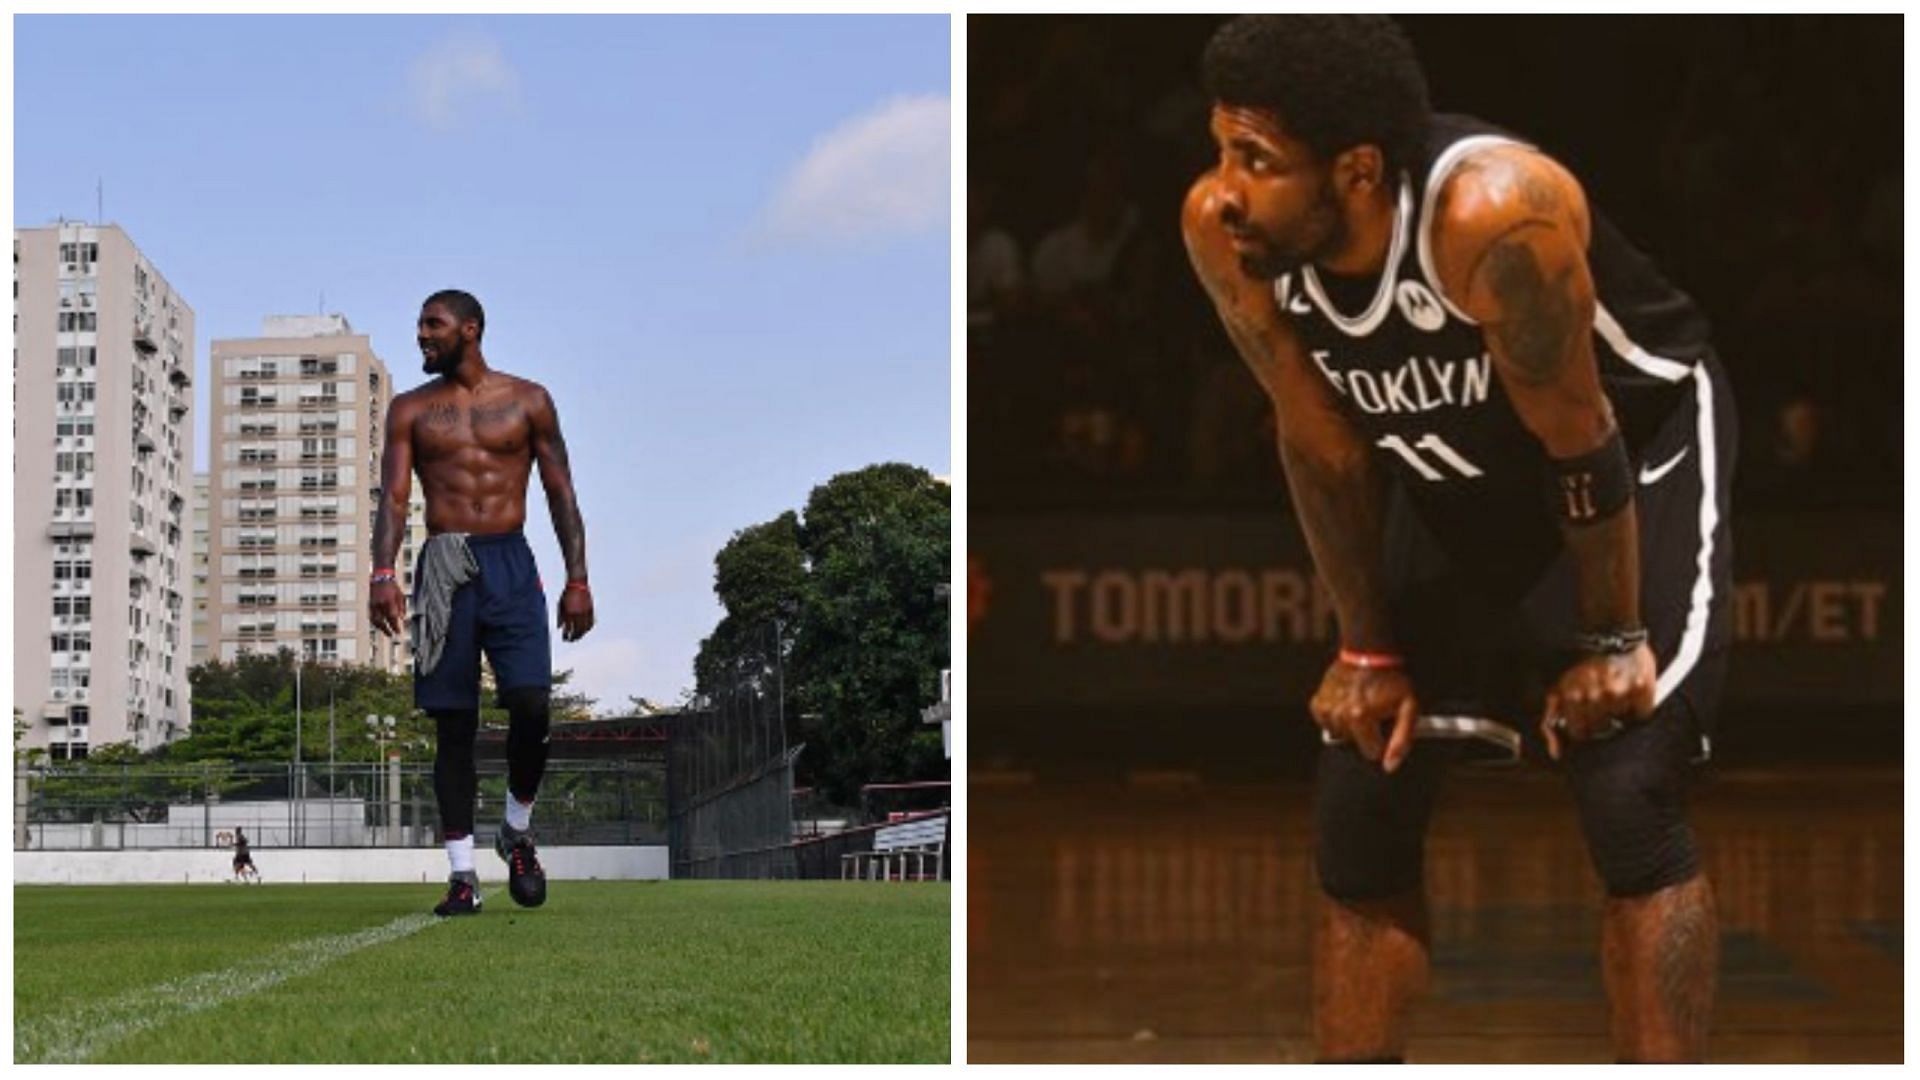 Kyrie Irving incorporates free weight and bodyweight movements in his workout routine. (Image via Instagram @Kyrieirving)